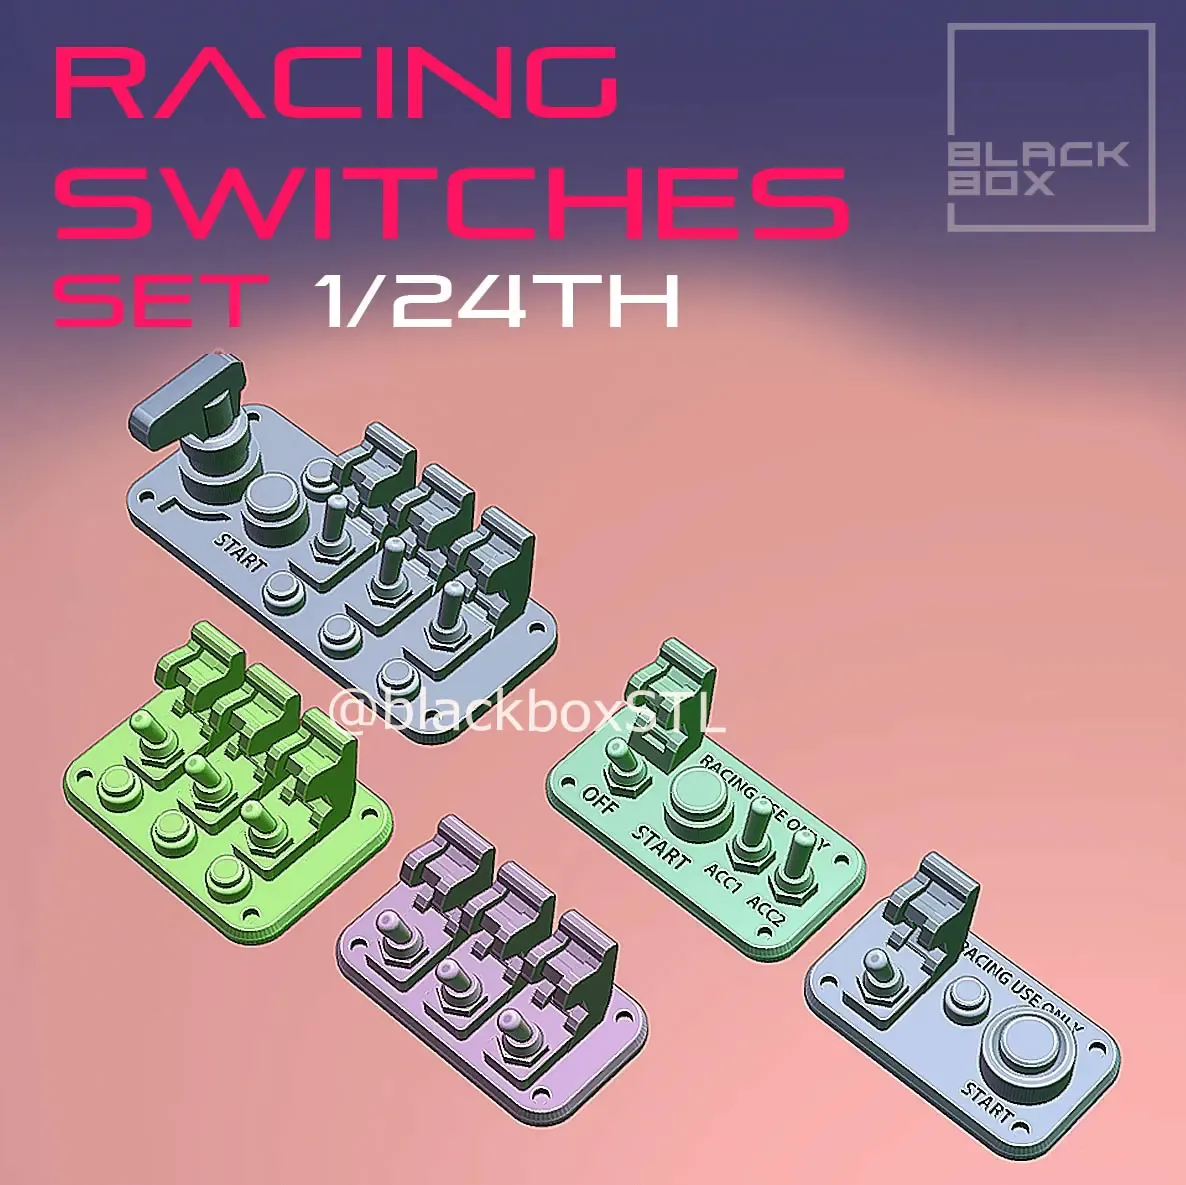 Racing Switches Set for modelkit and diecast 1-24th scale